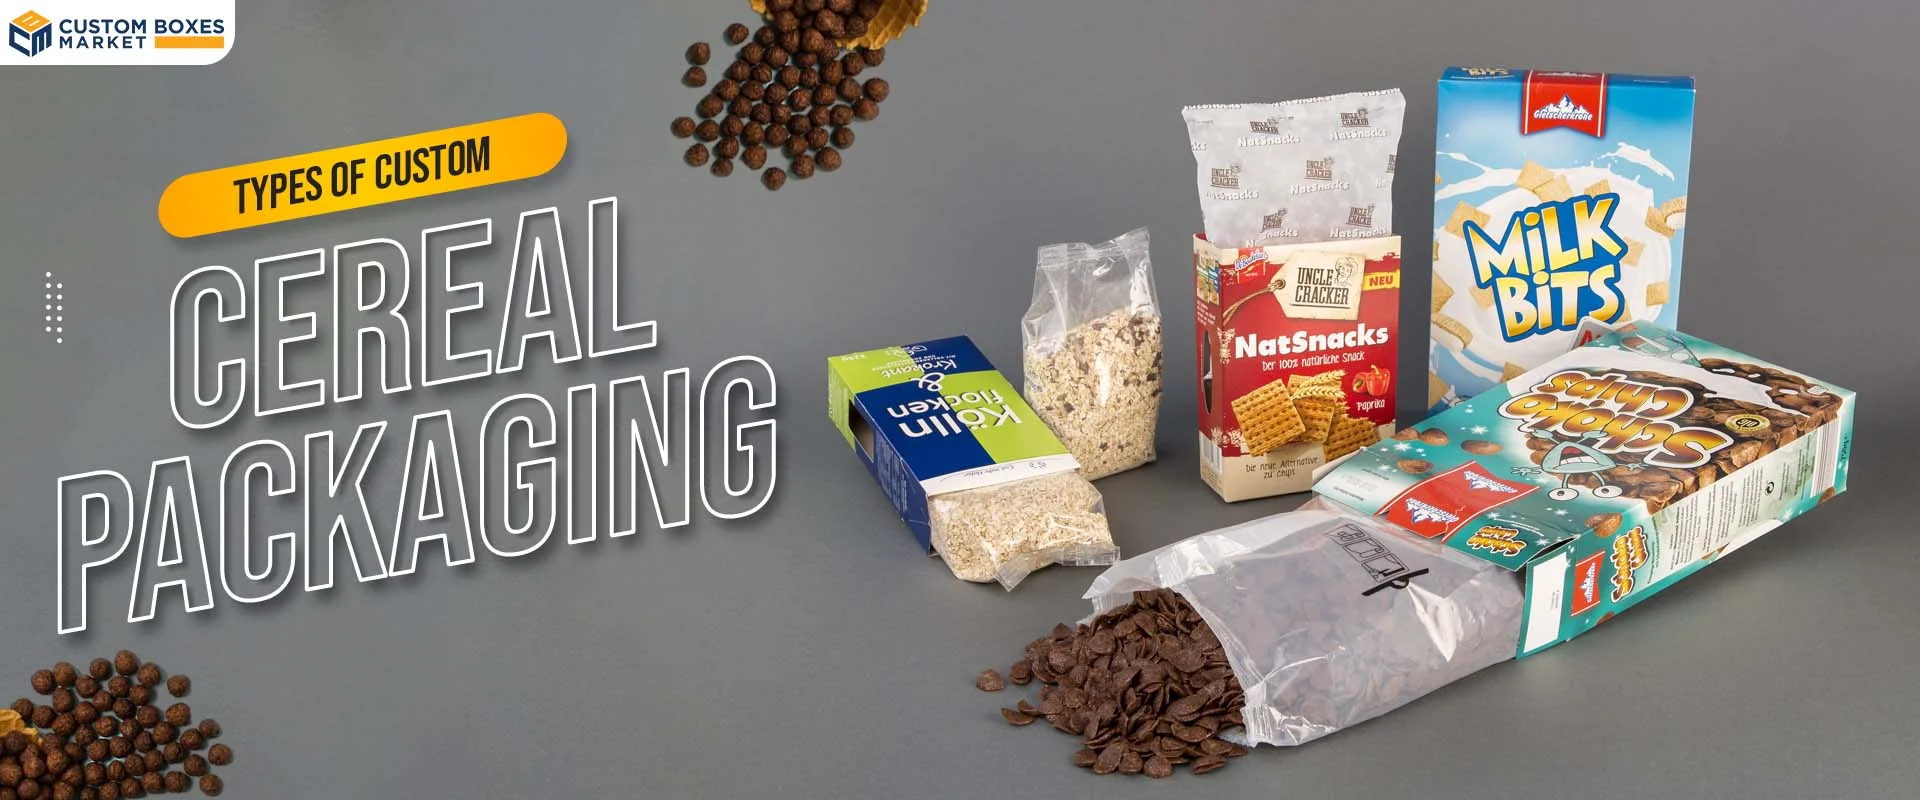 Types Of Cereal Packaging